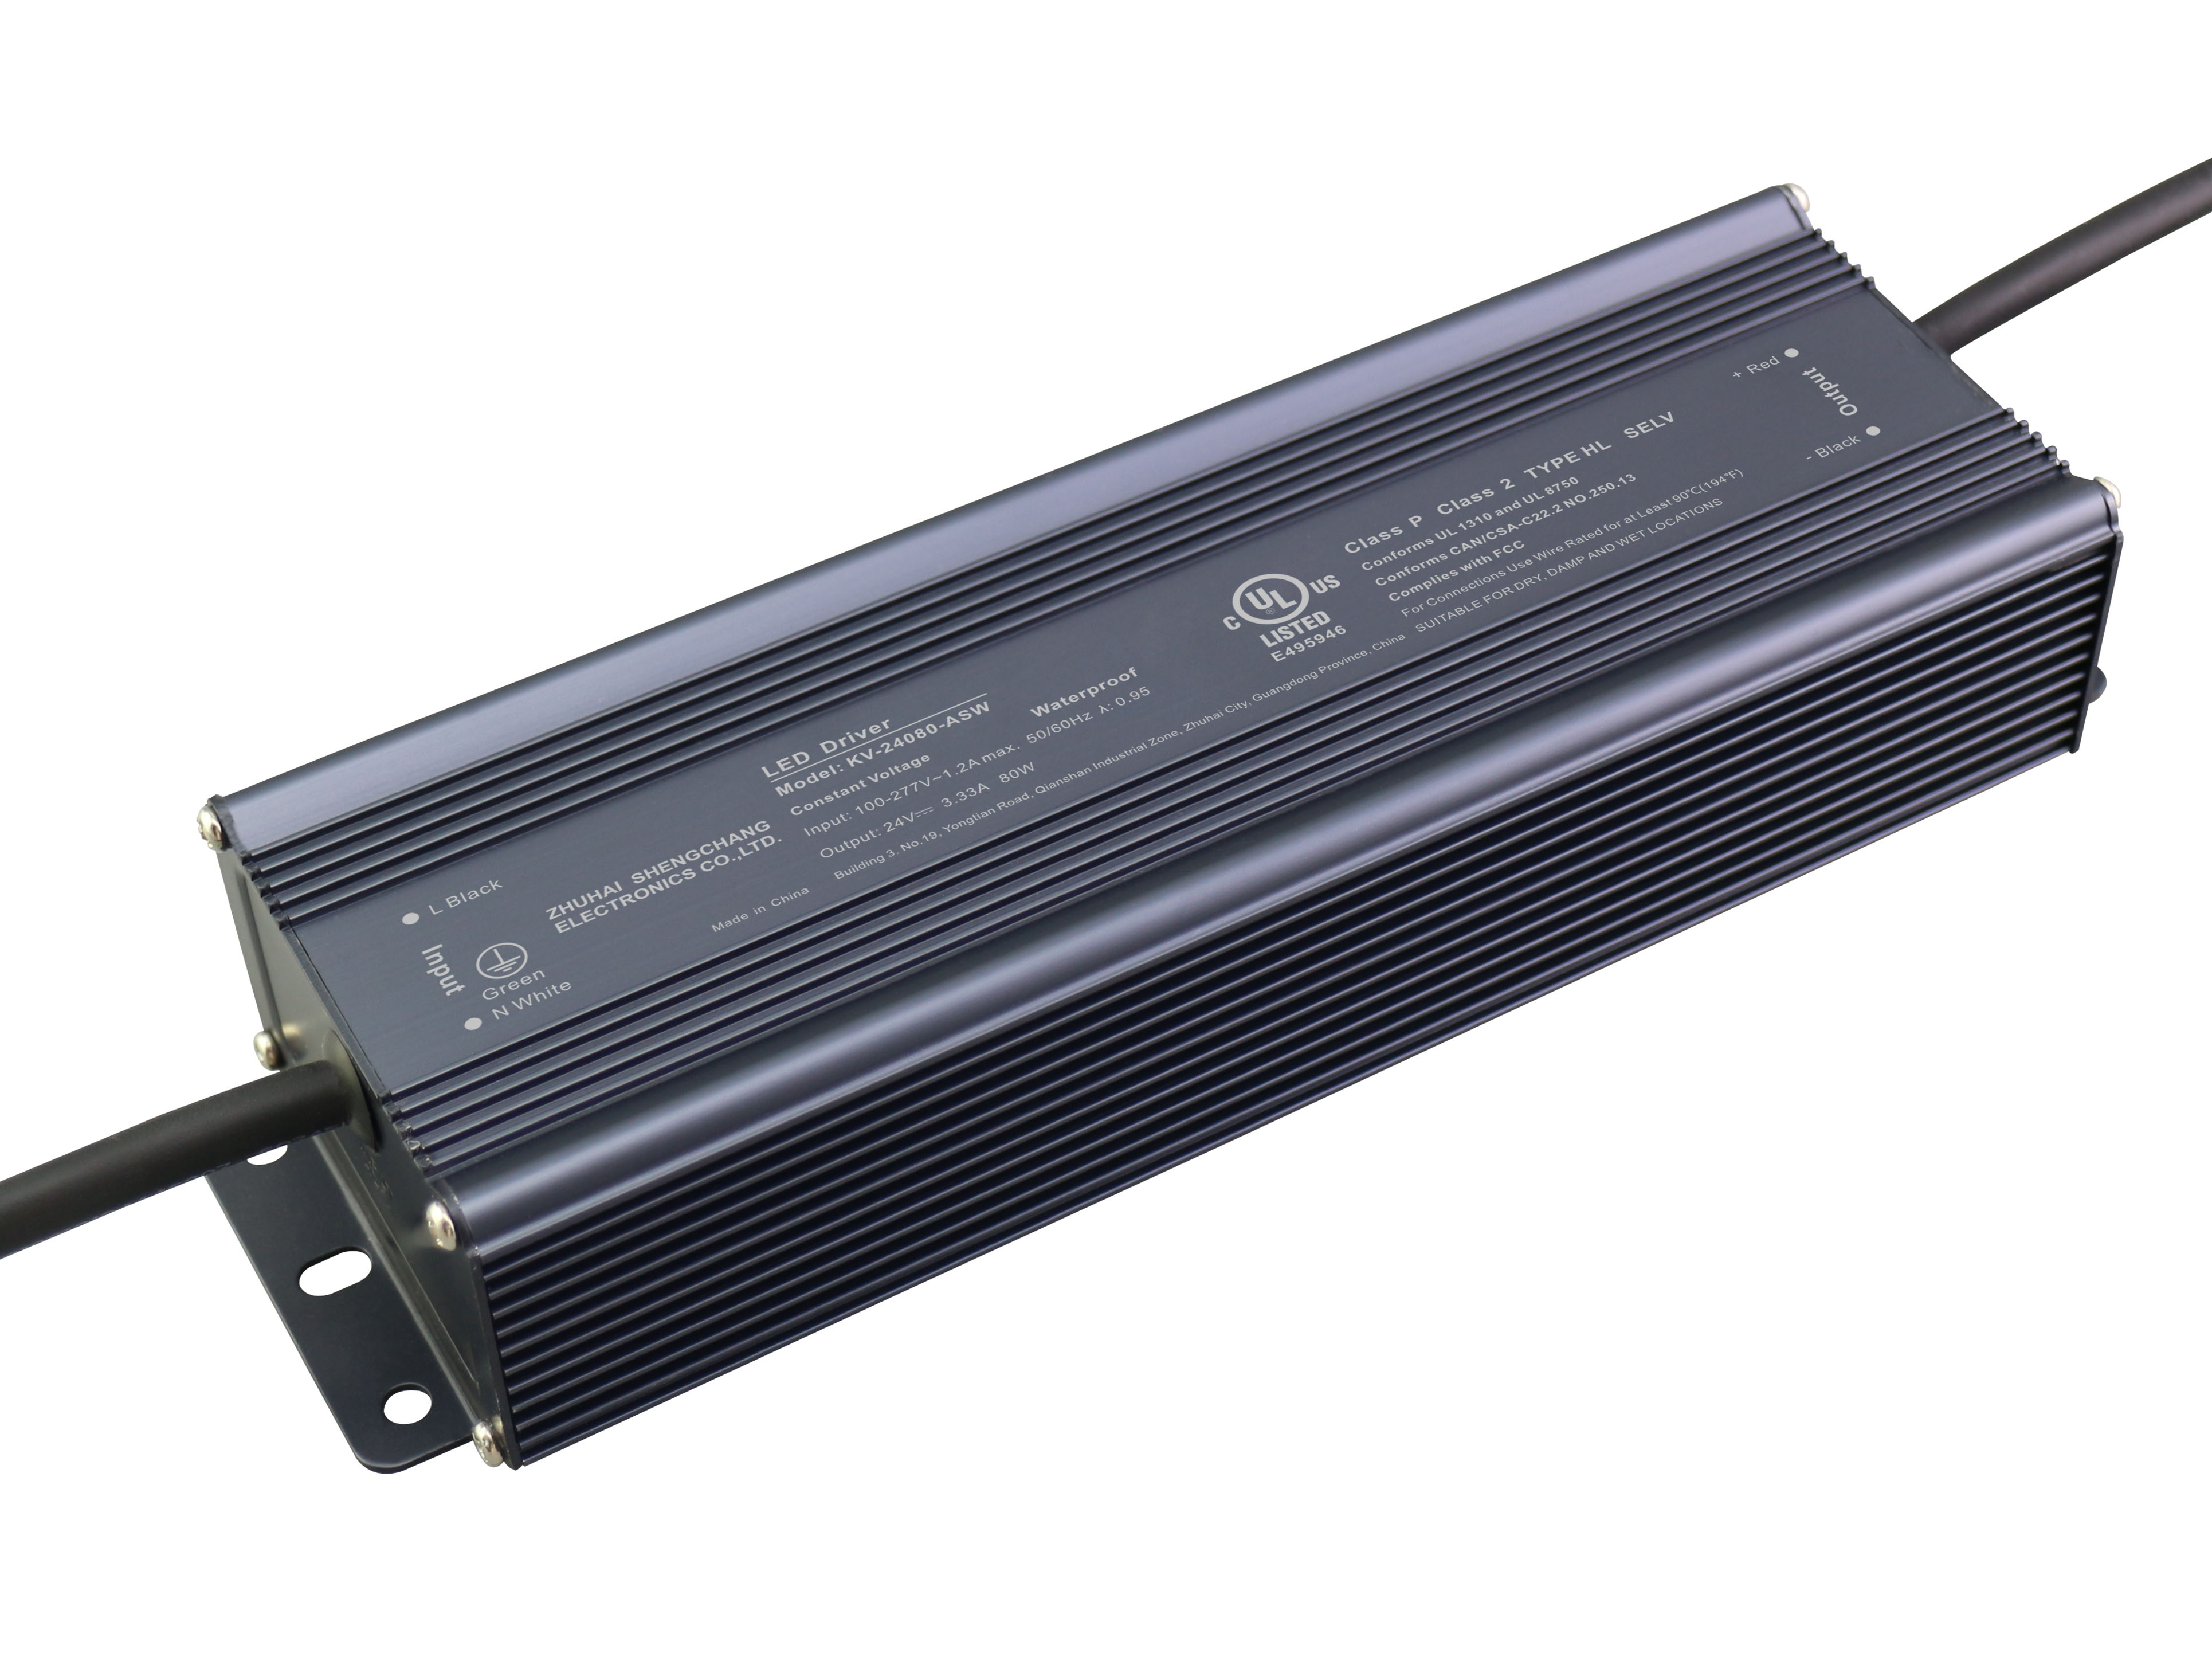 KV-ASW Series 96W Constant Voltage Non-Dimming LED Driver